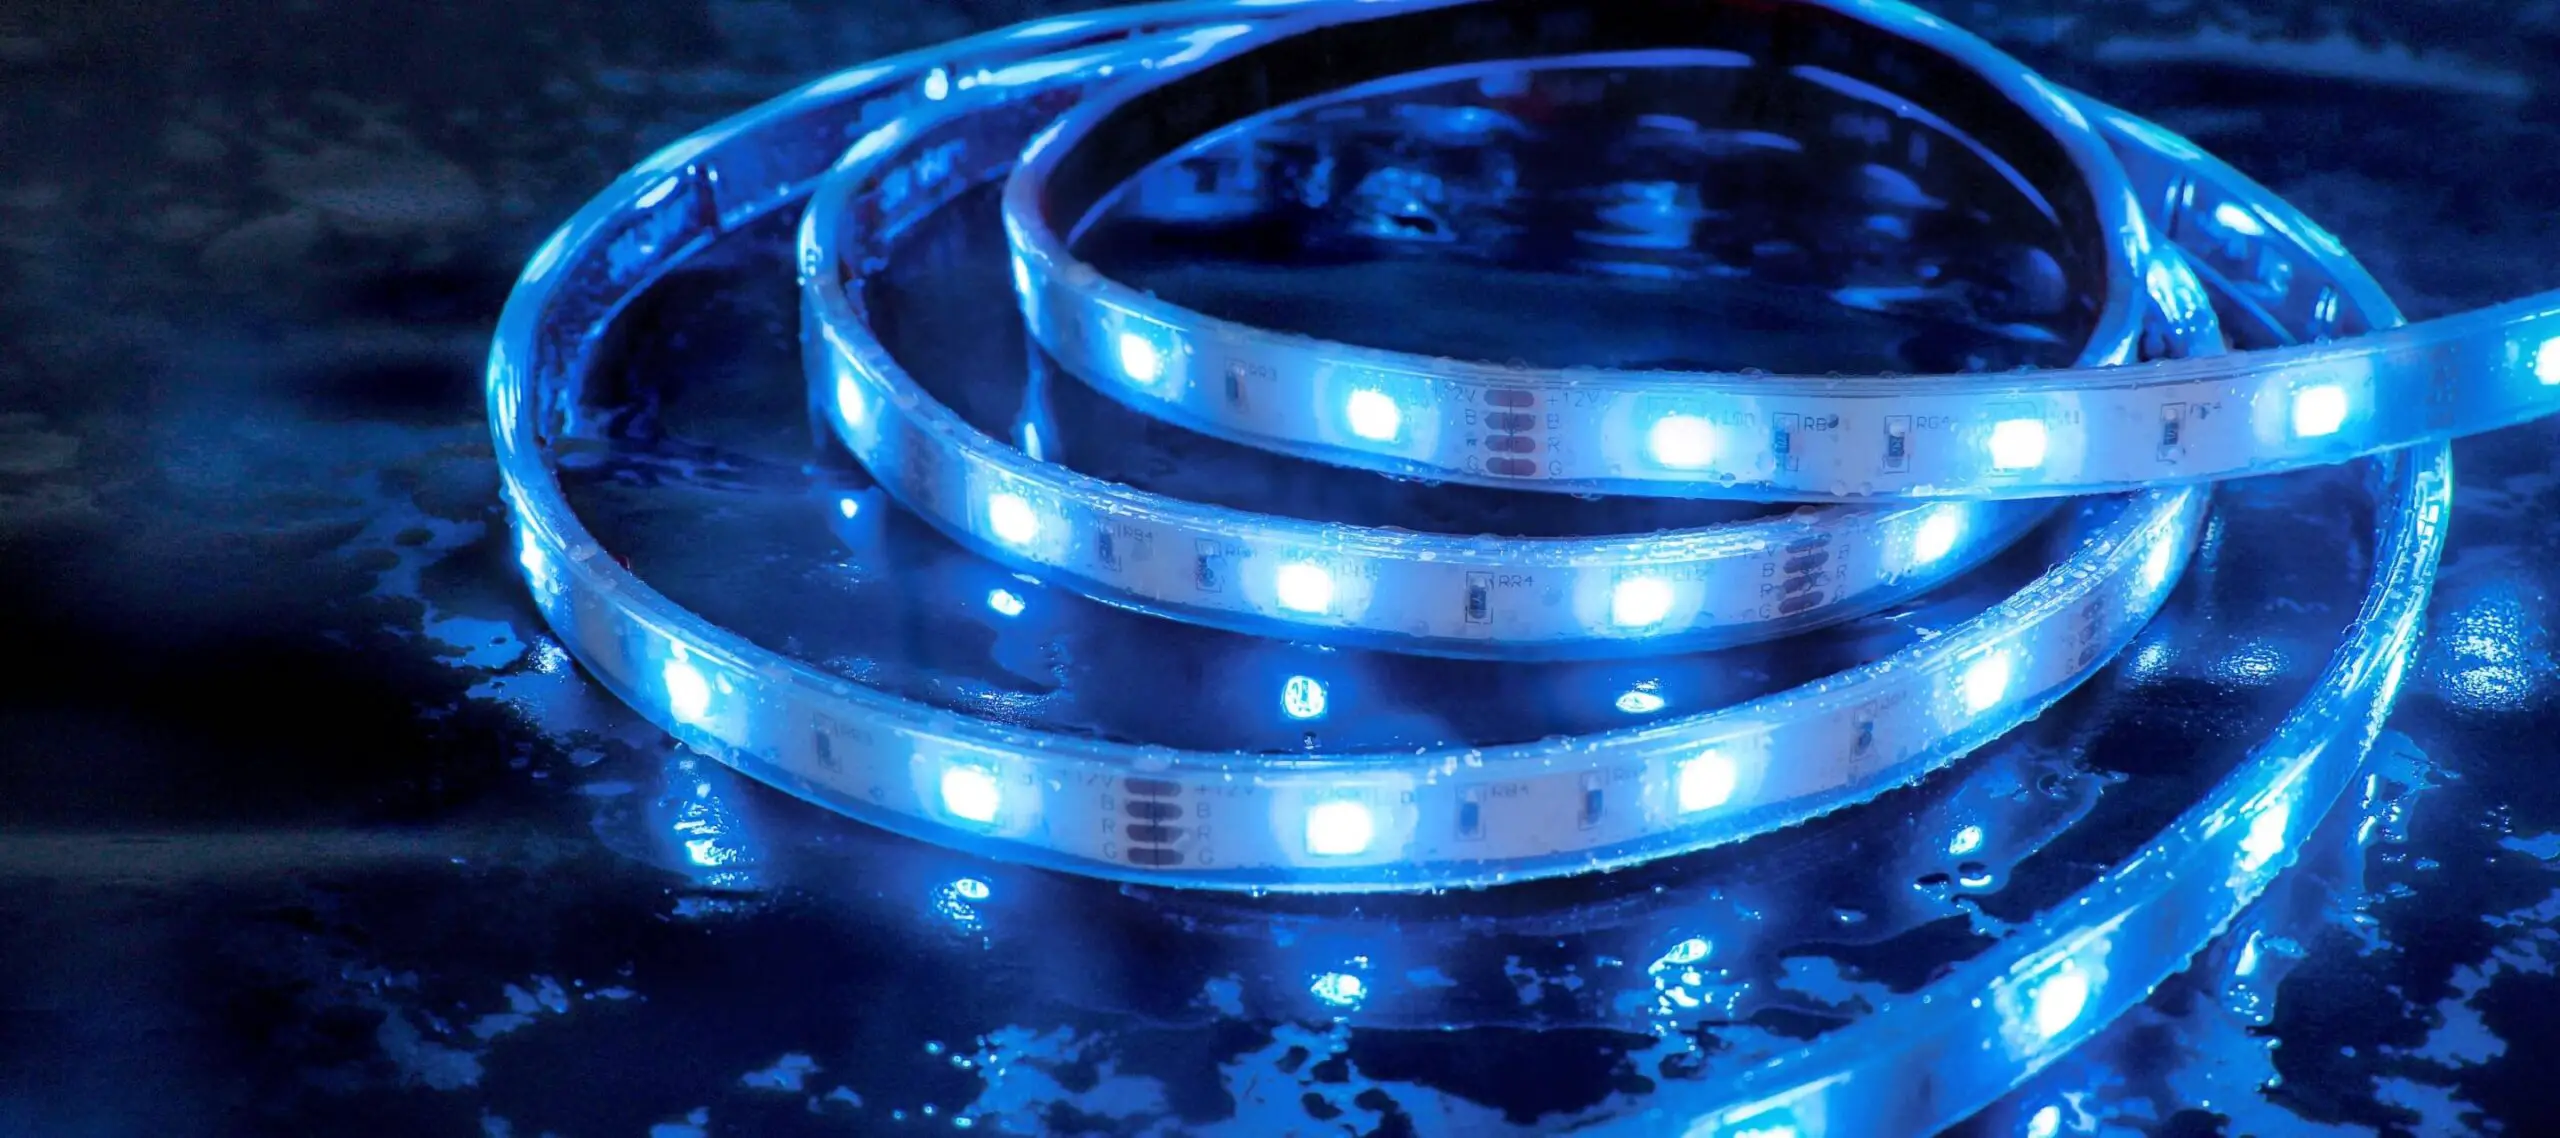 Do LED light strips use a lot of electricity in your home?